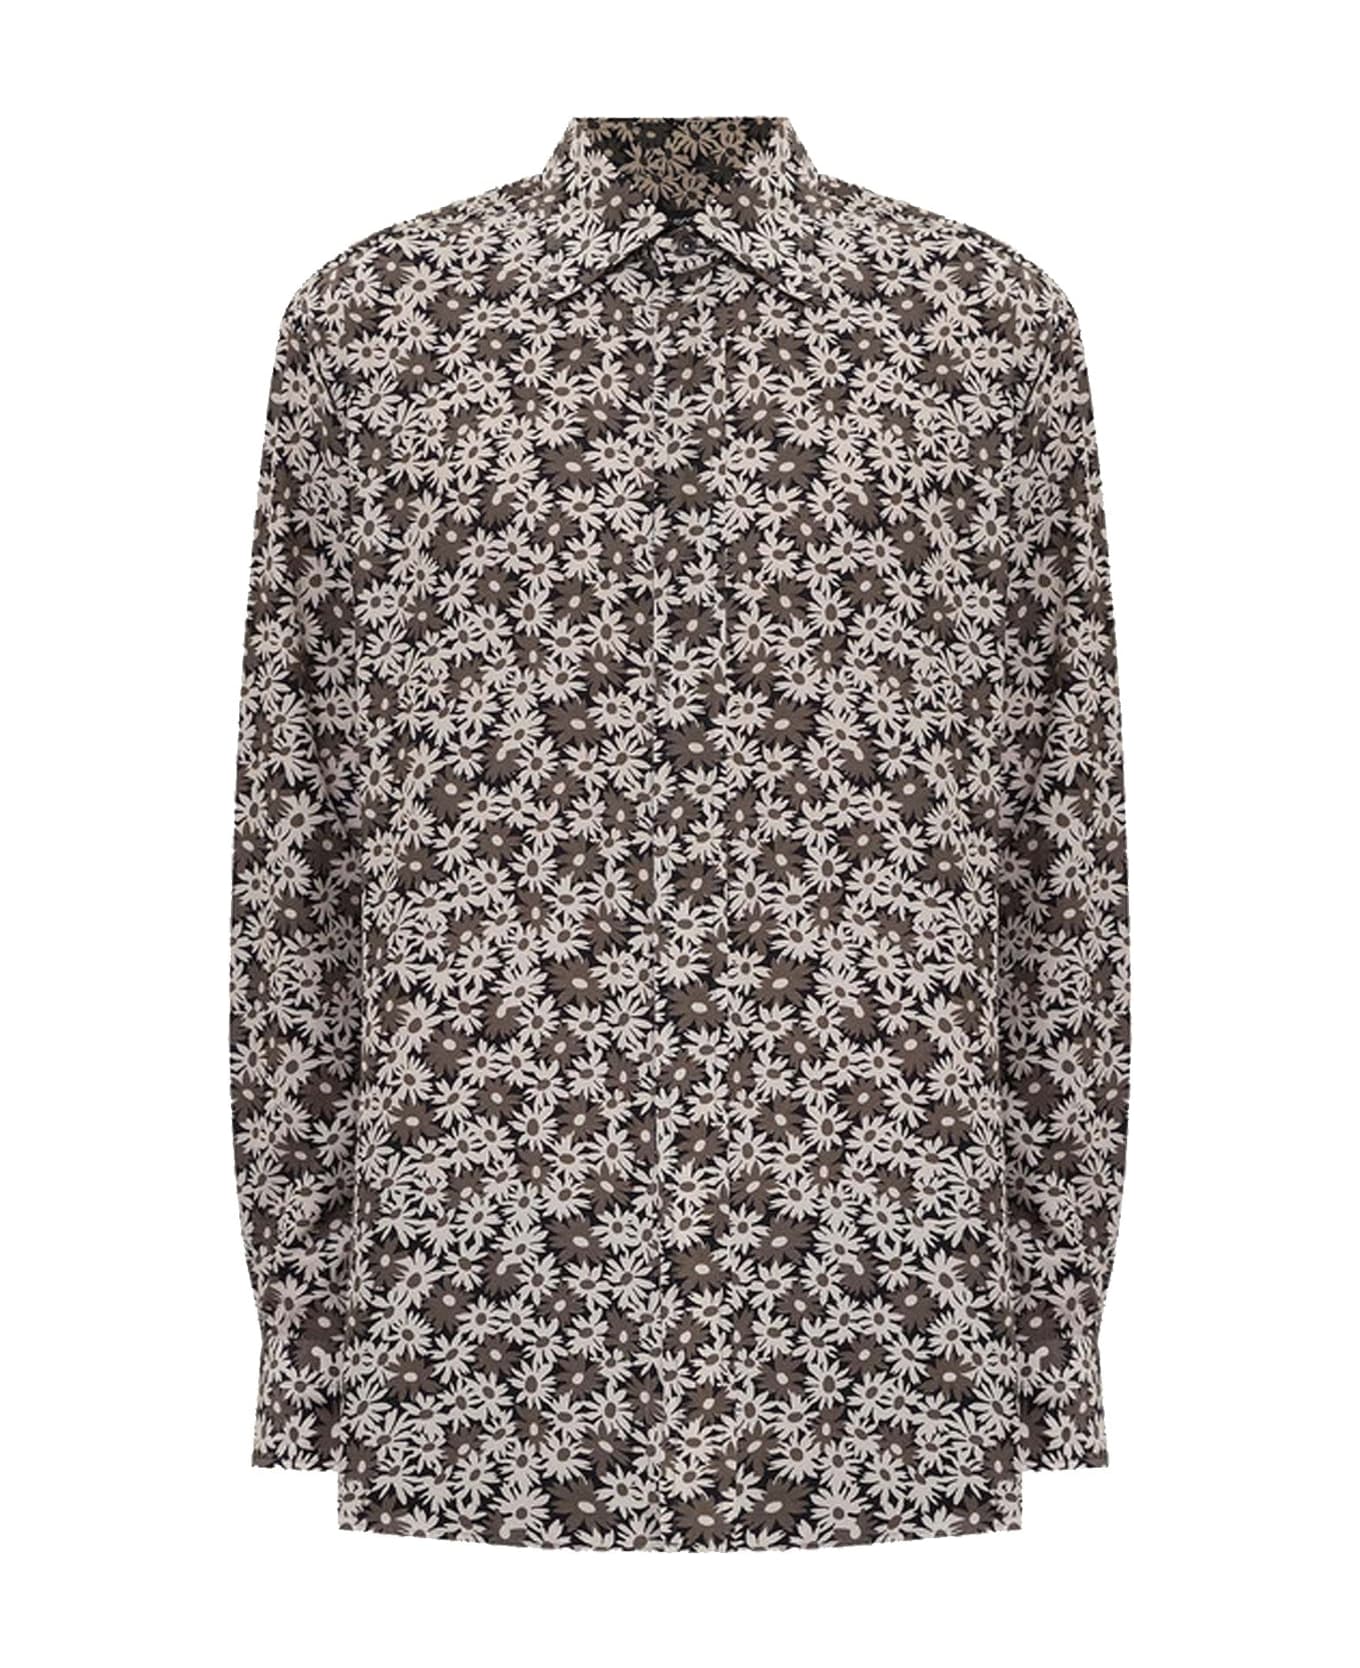 Tom Ford Floral Shirt - Green シャツ